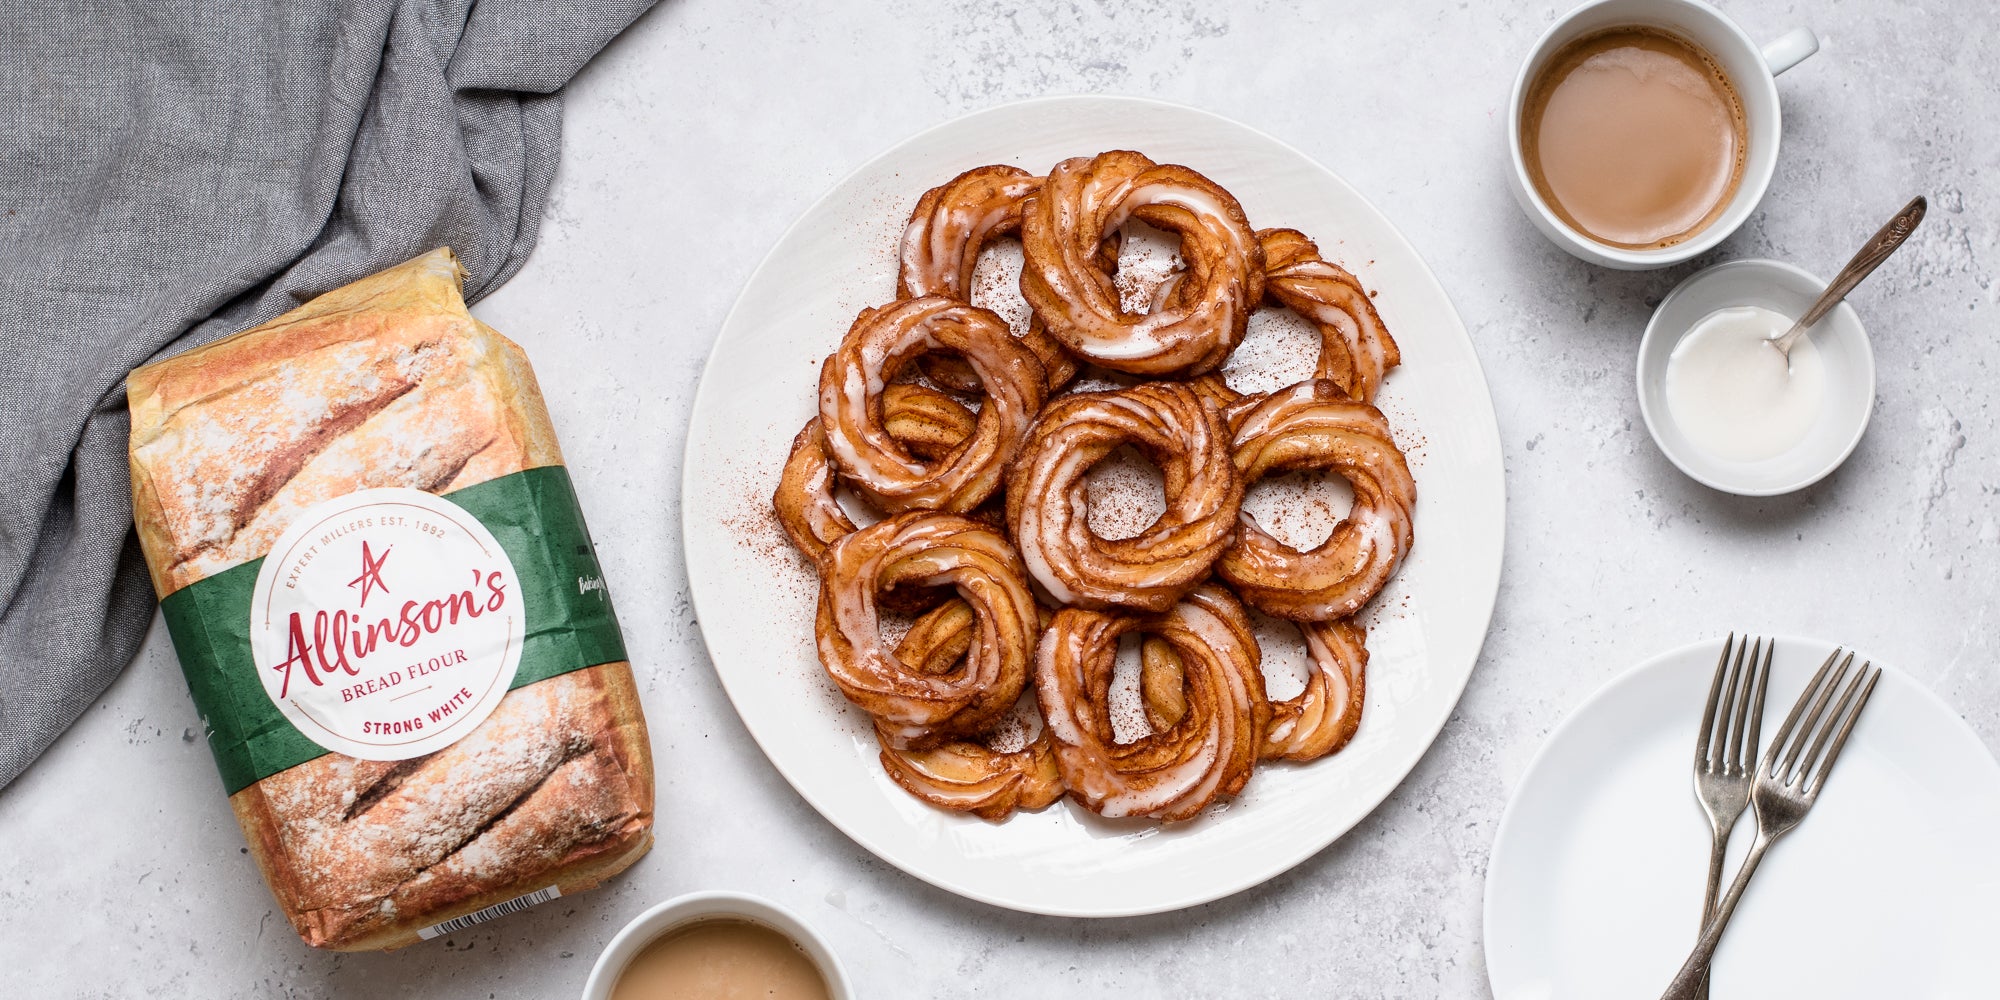 Apple Cider Crullers on a plate, next to a bag of Allinson's Strong White Flour, topped with icing.